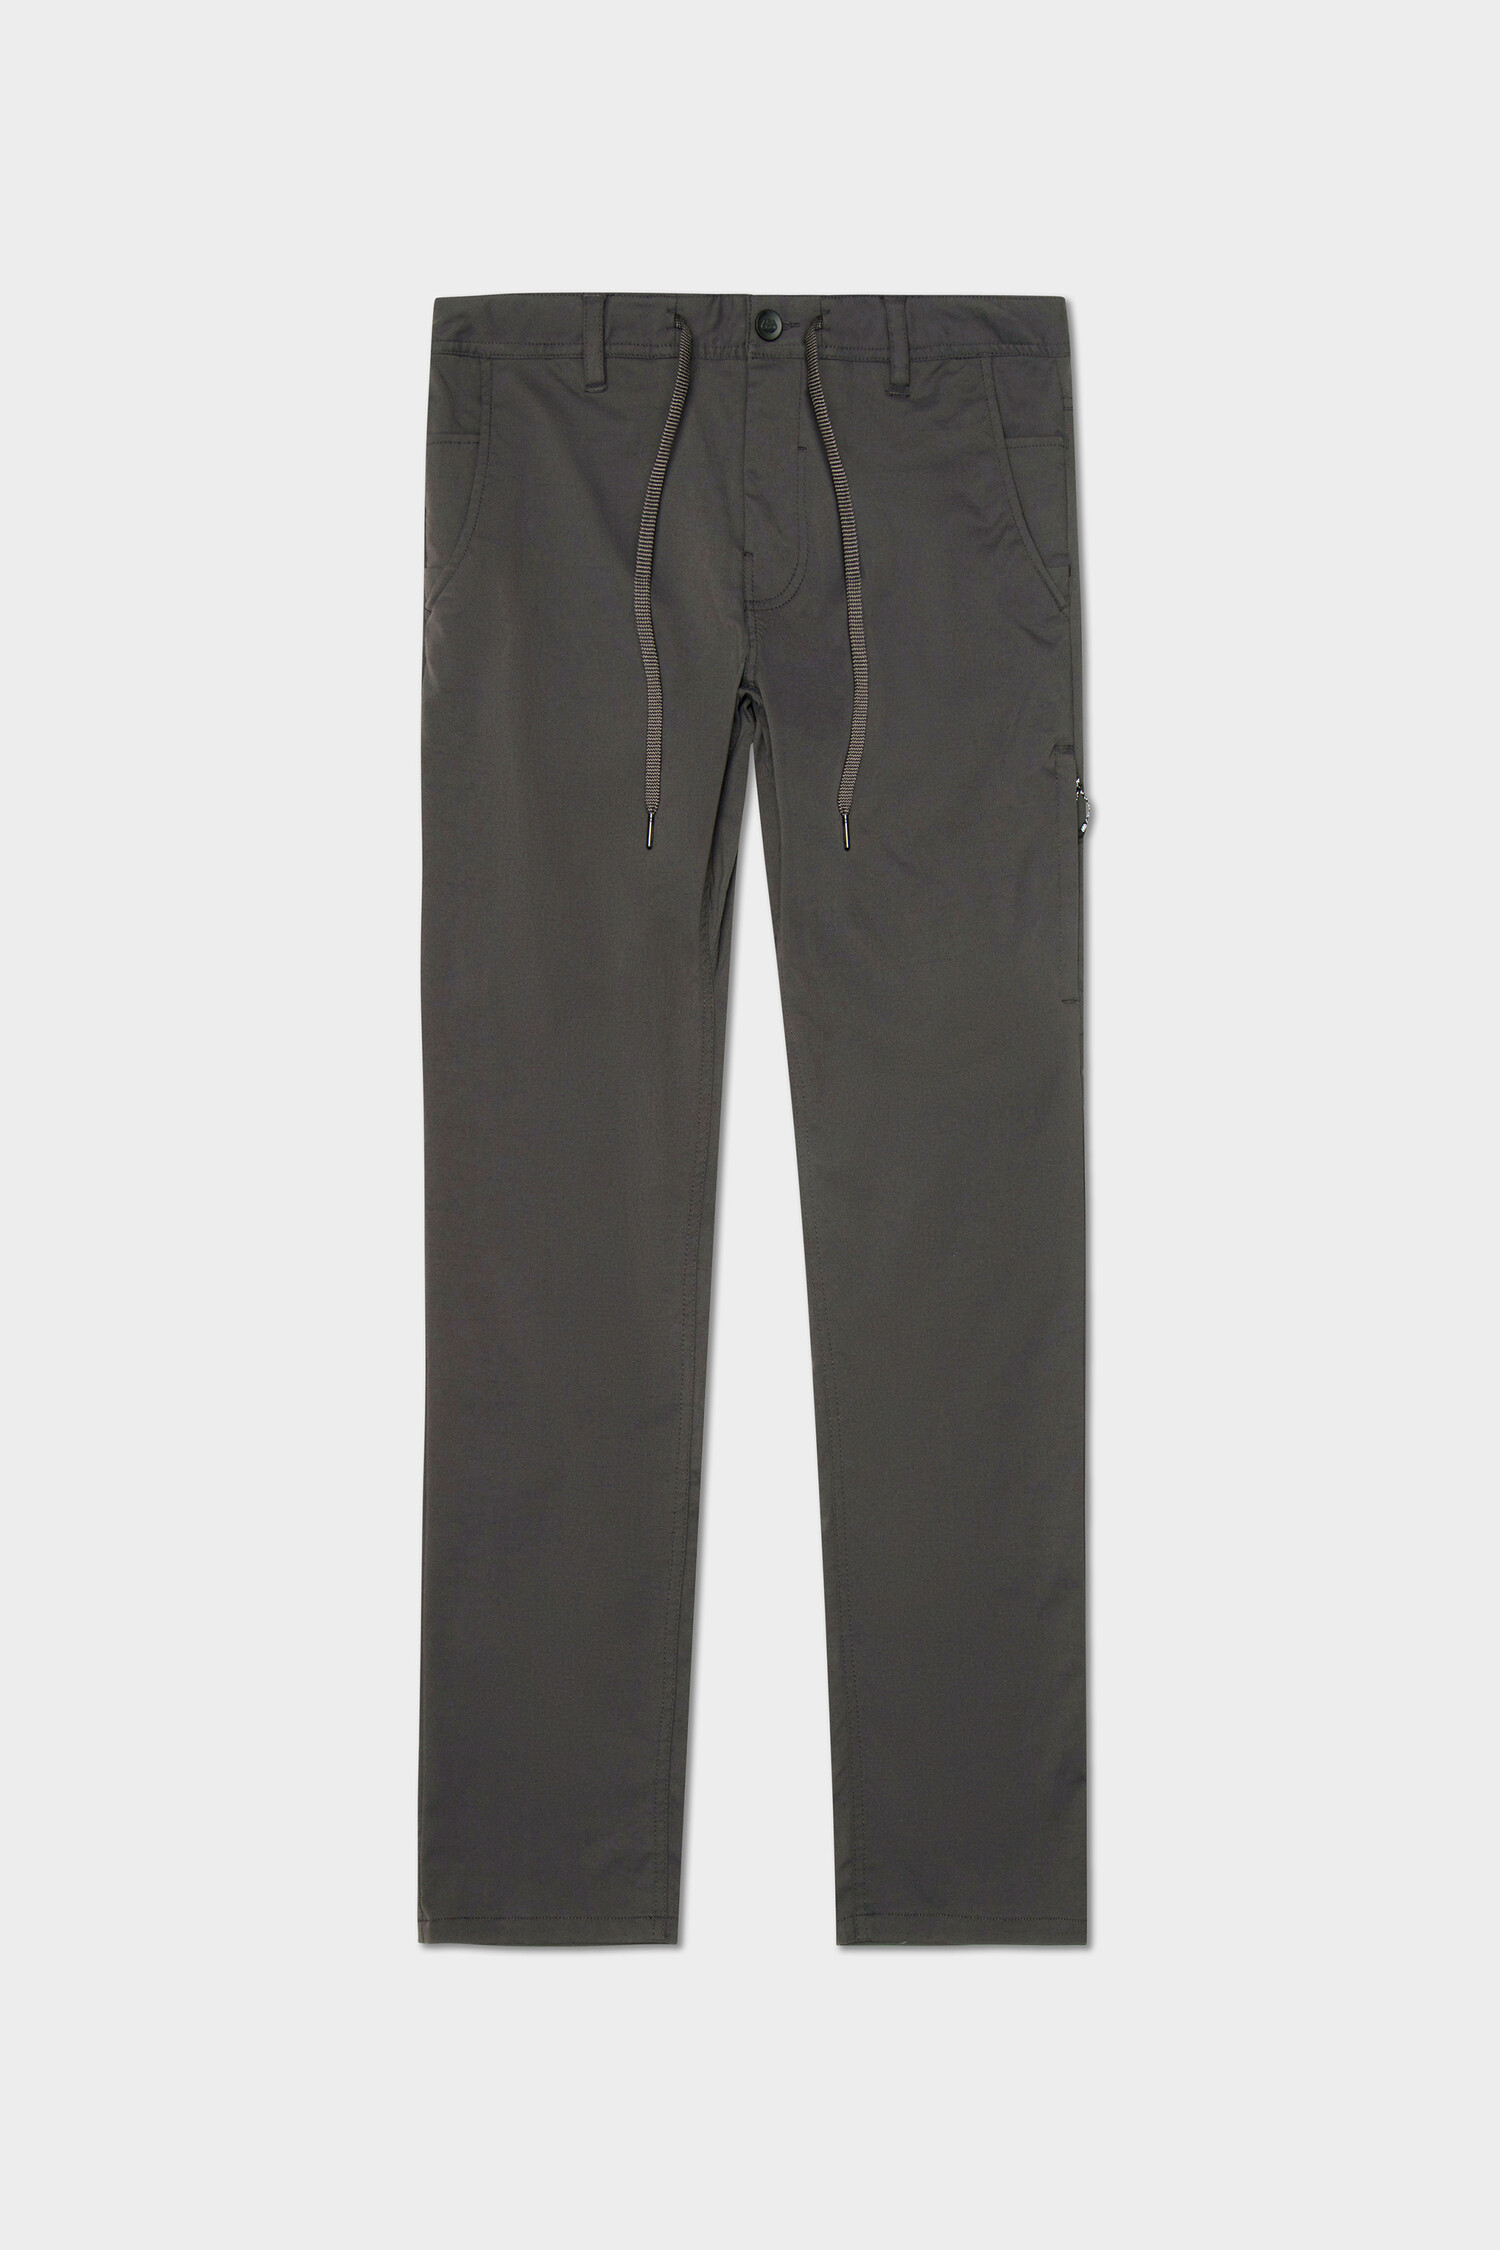 686 686 Mens Everywhere Merino Wool Lined Pant - Relaxed Fit | Charcoal